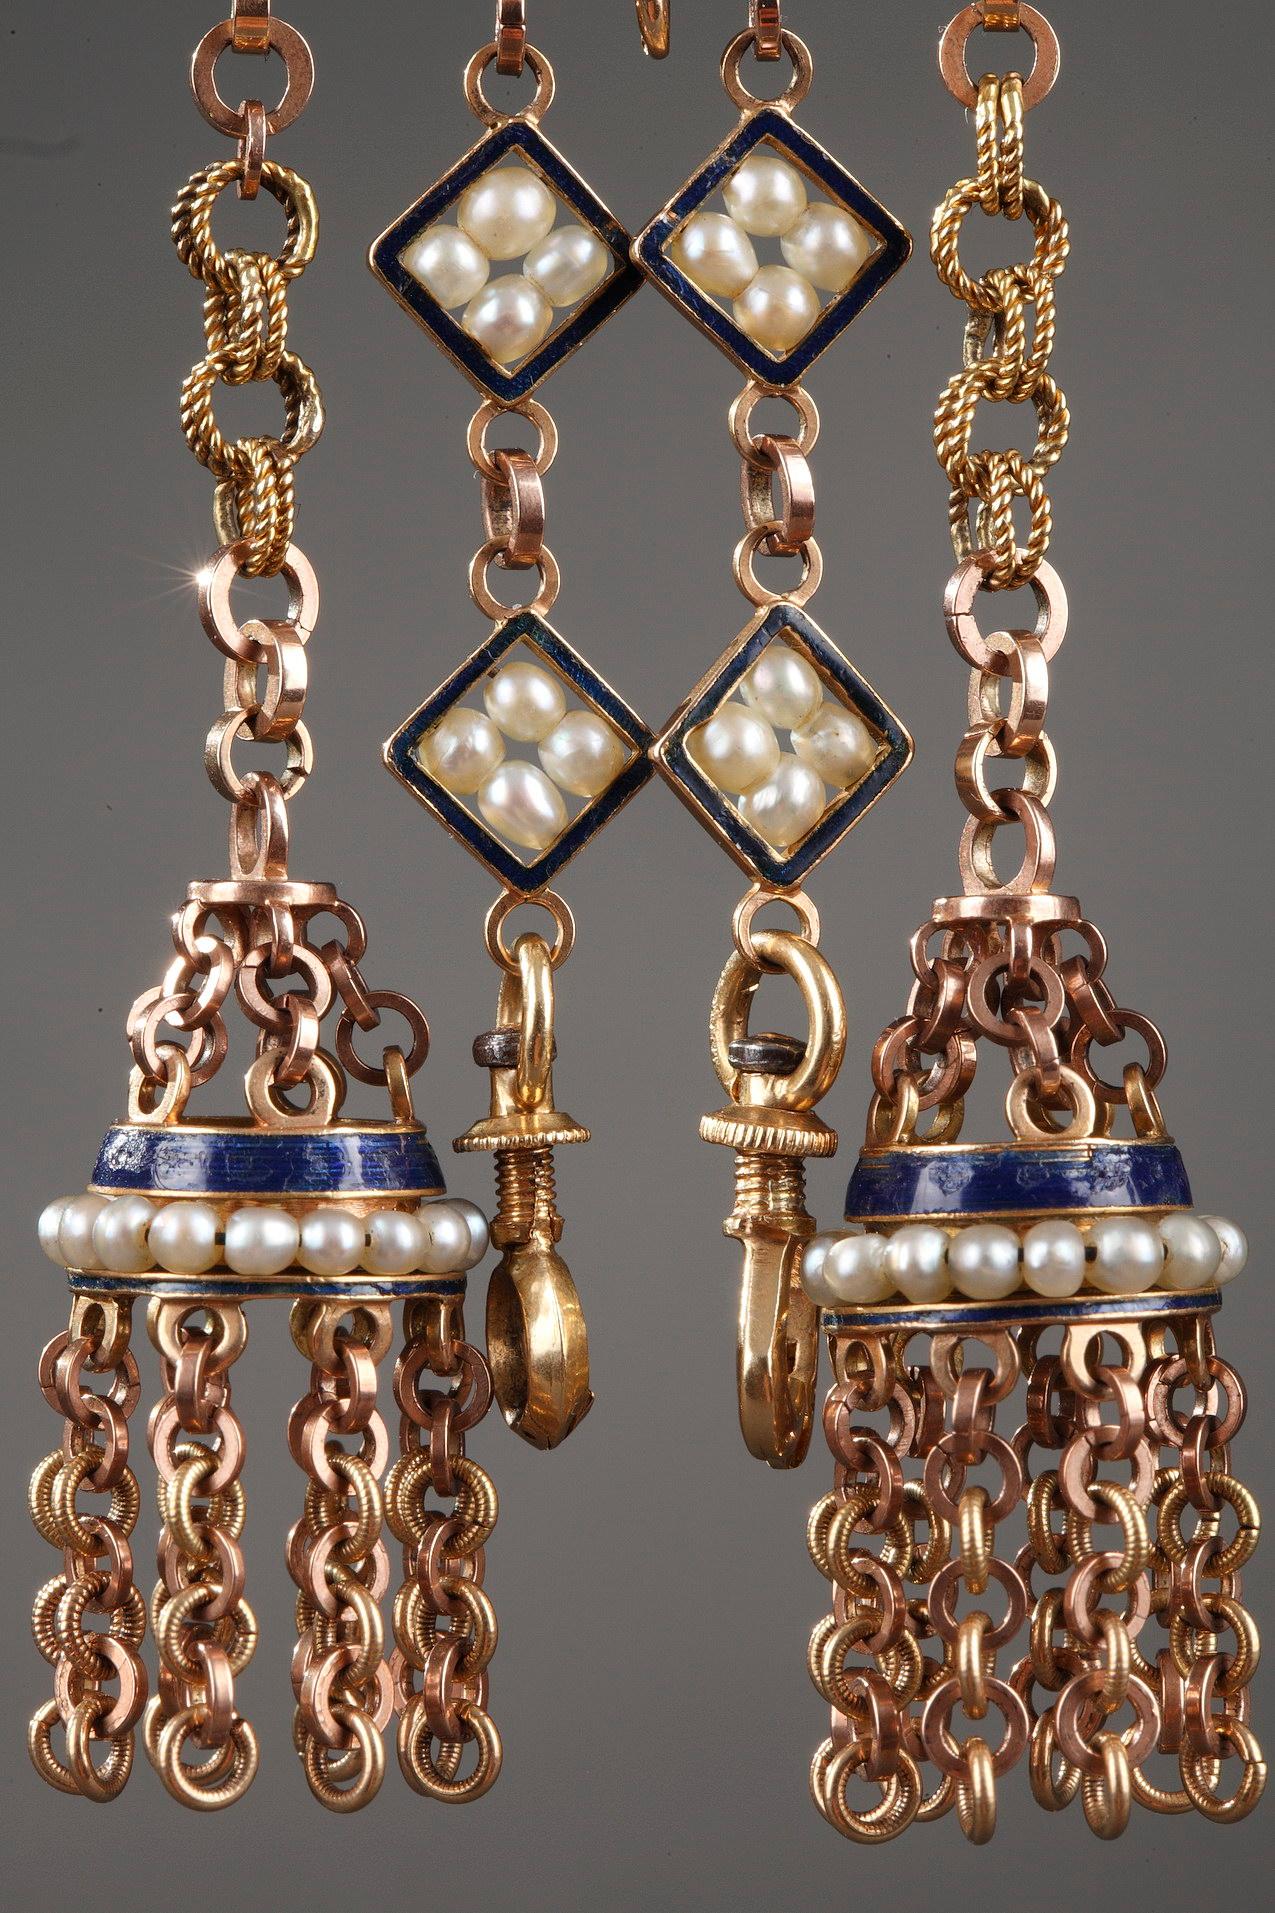 Chatelaine with Gold, Enamel and Pearls, Late 18th Century Work For Sale 3